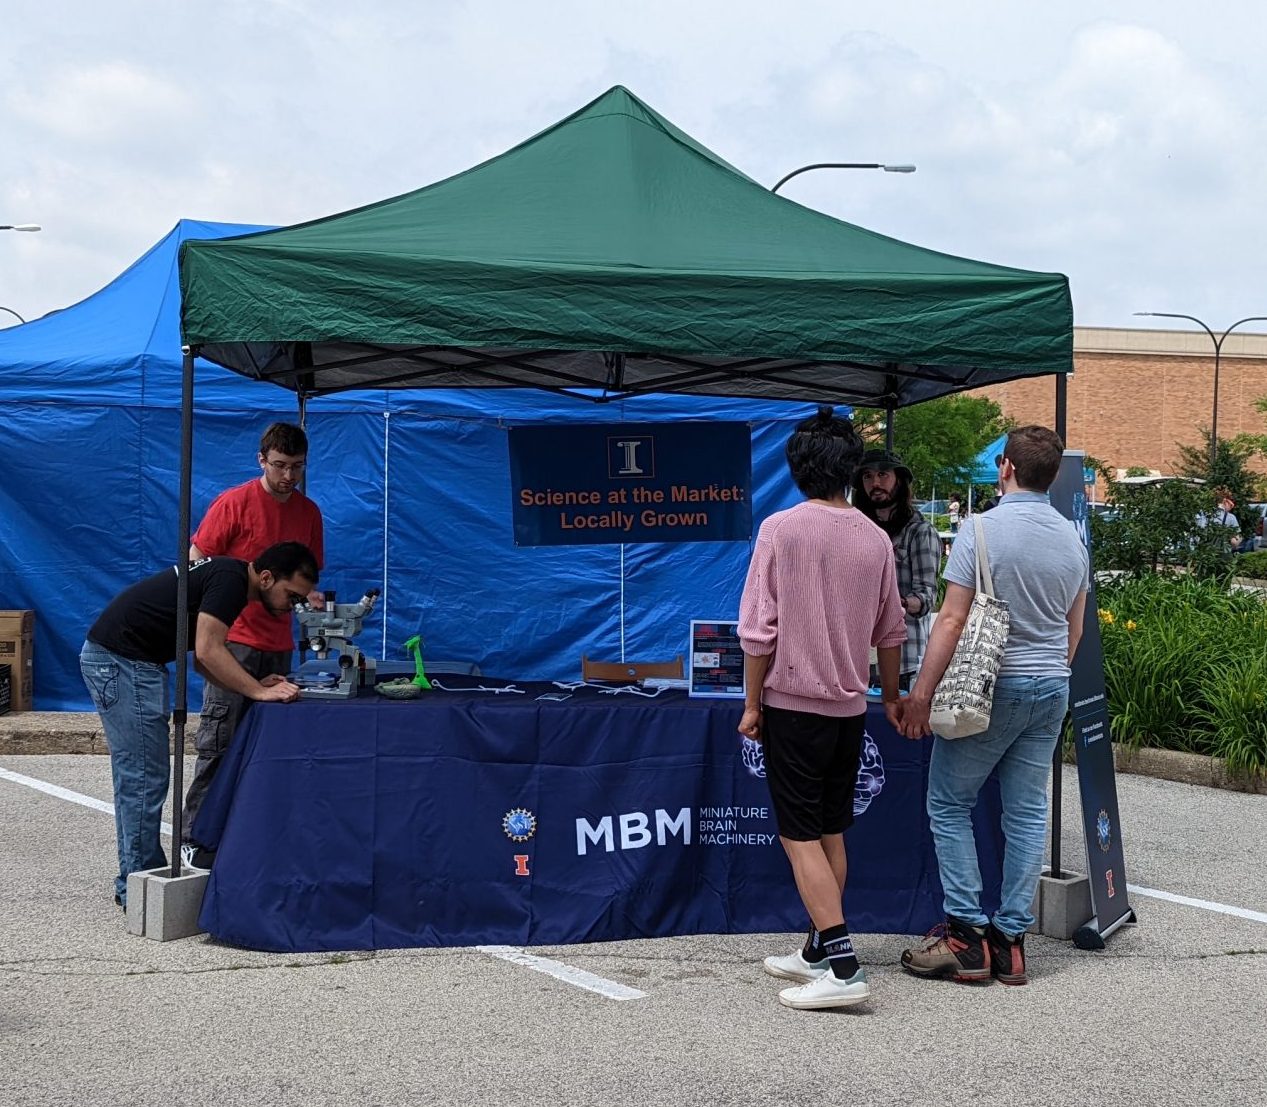 MBM trainees interact with farmer's market attendees